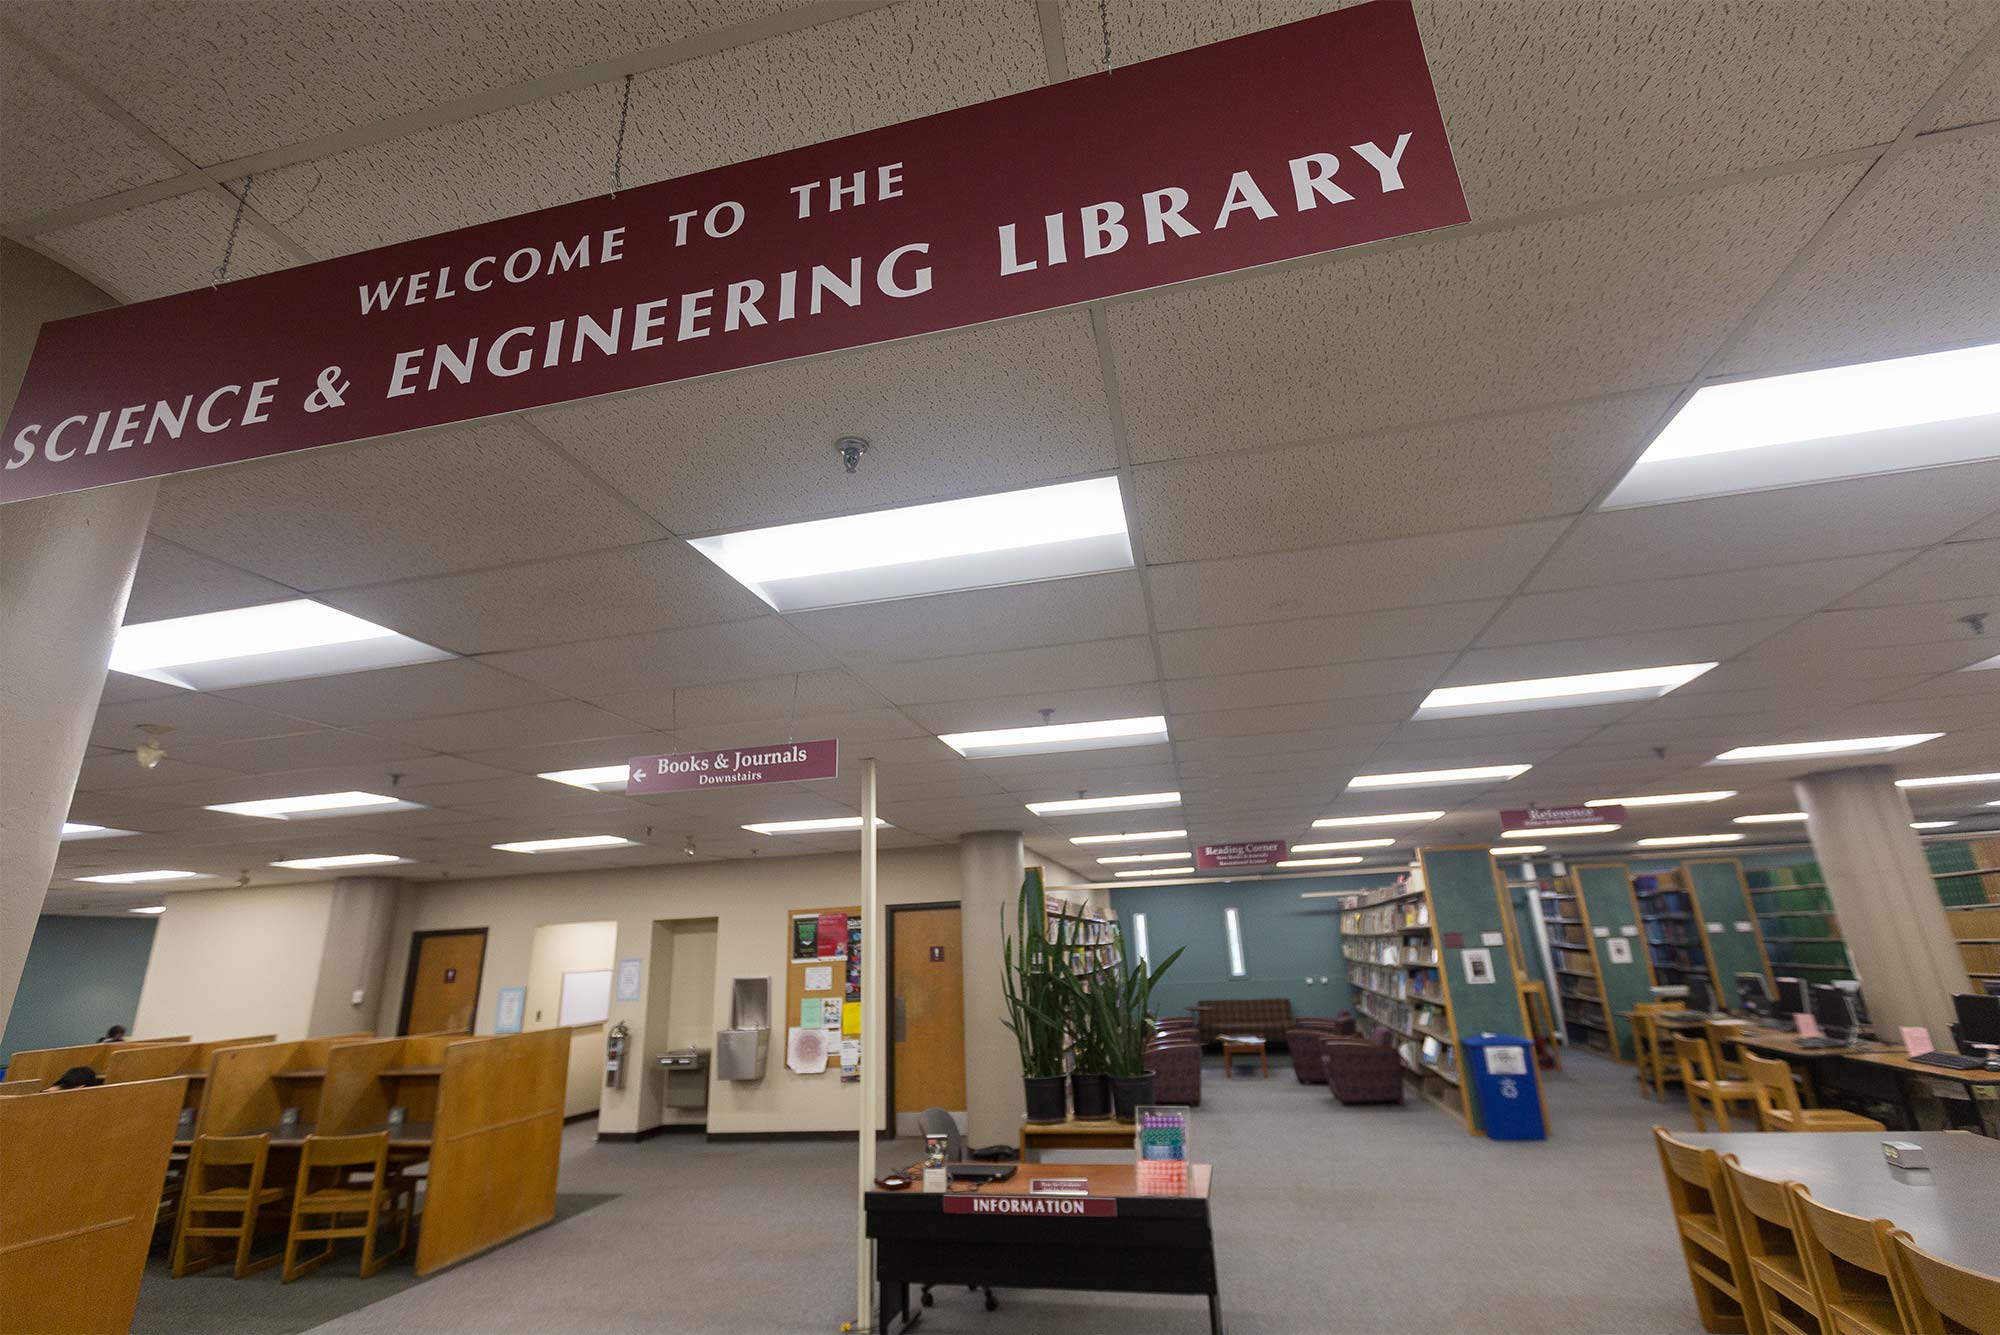 Interior view of the Science & Engineering Library at Boston University.